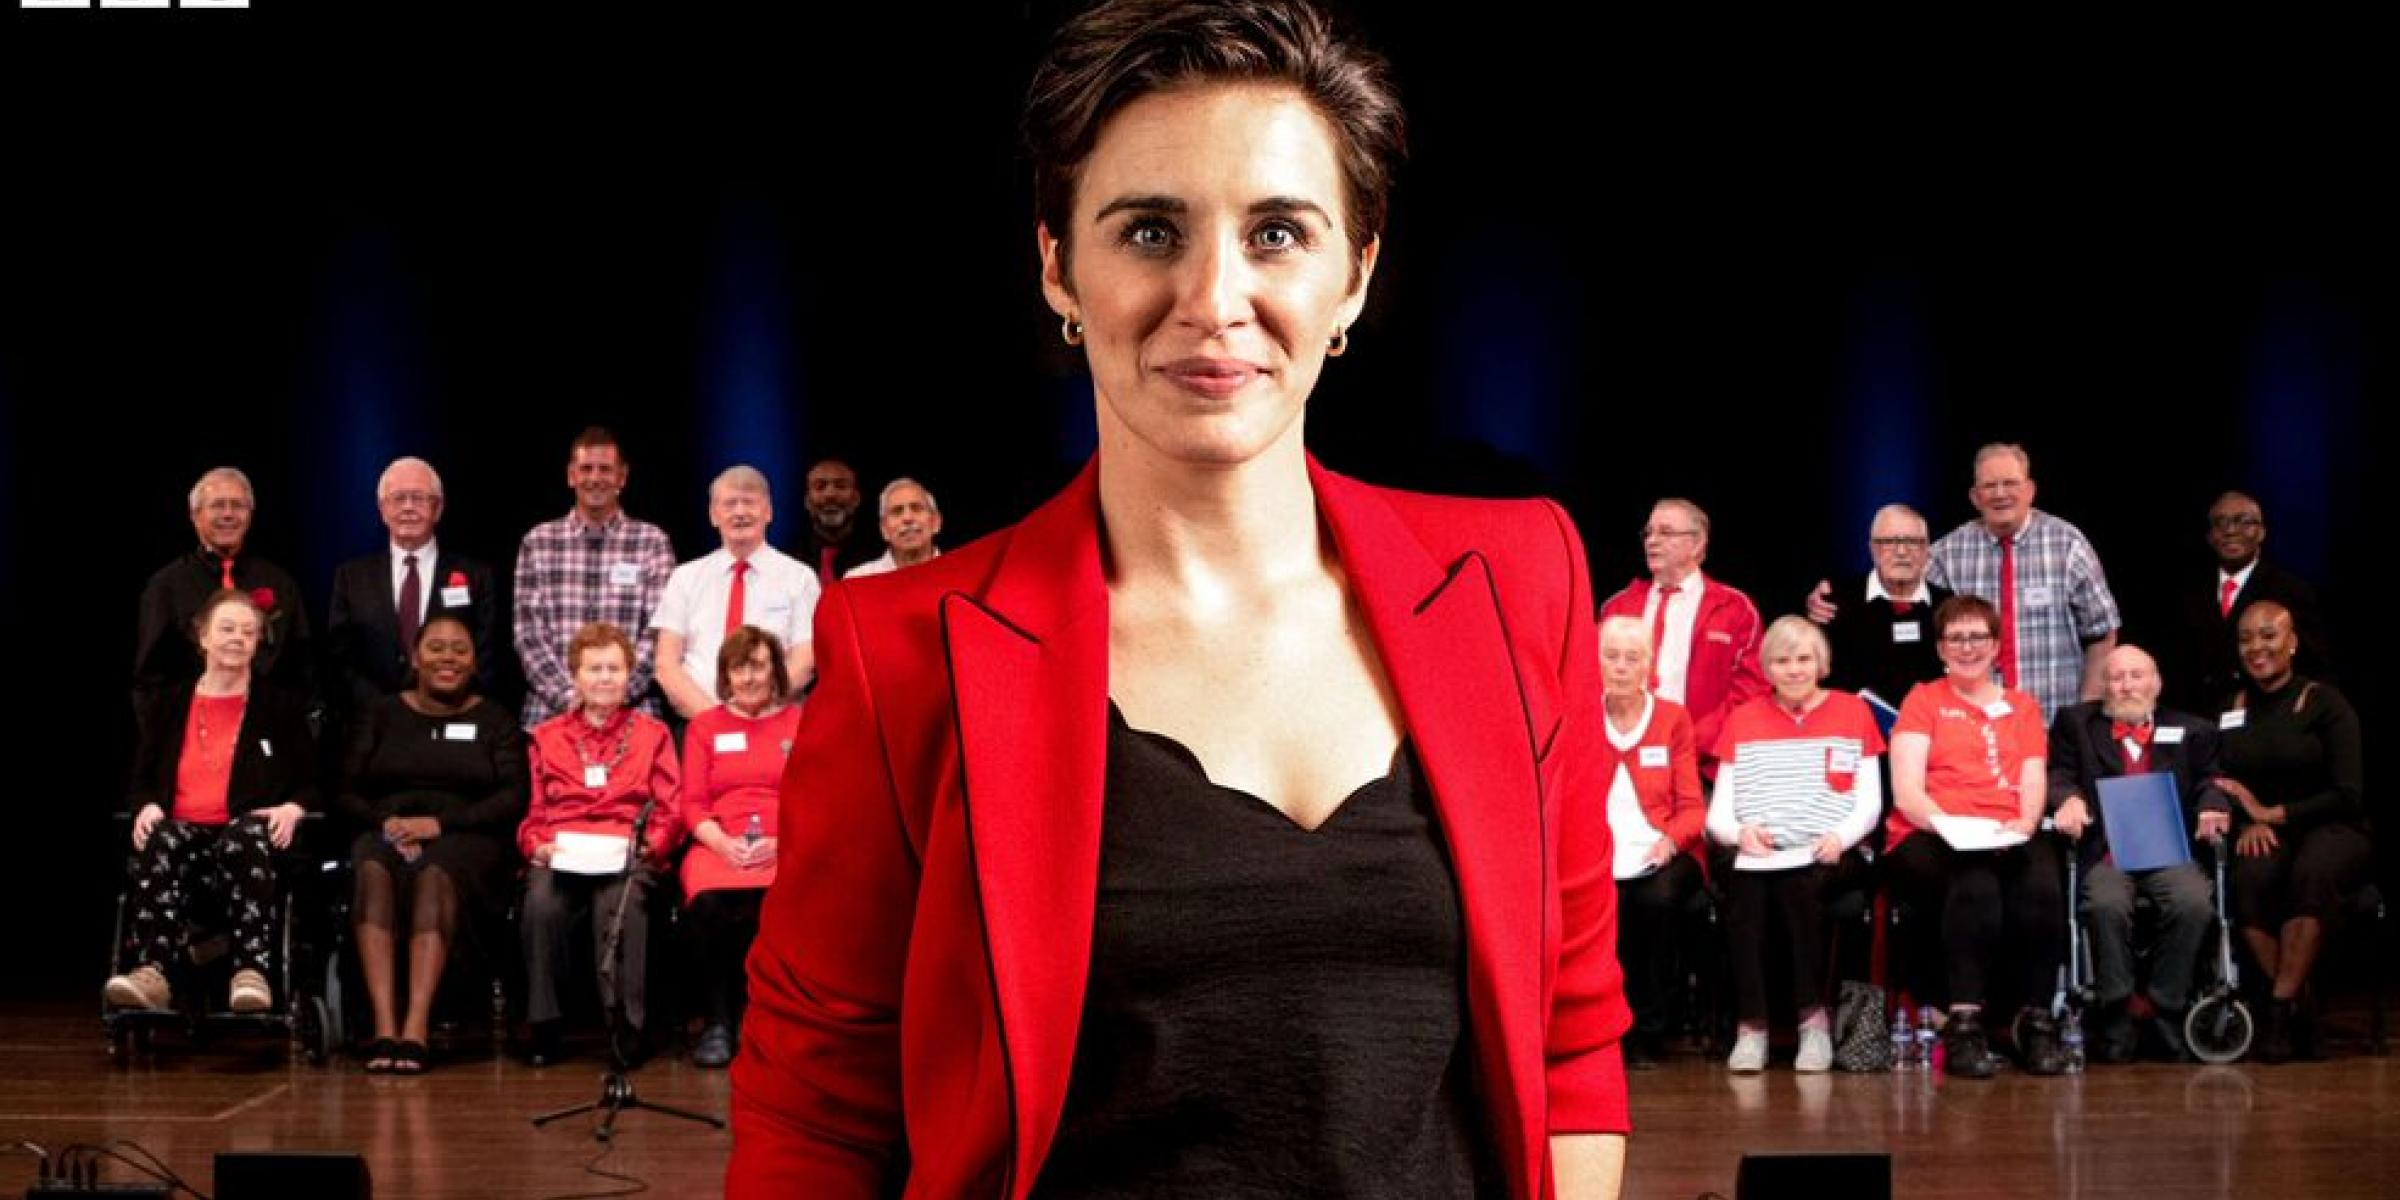 Vicky McClure smiling in the foreground with a choir of singers behind her